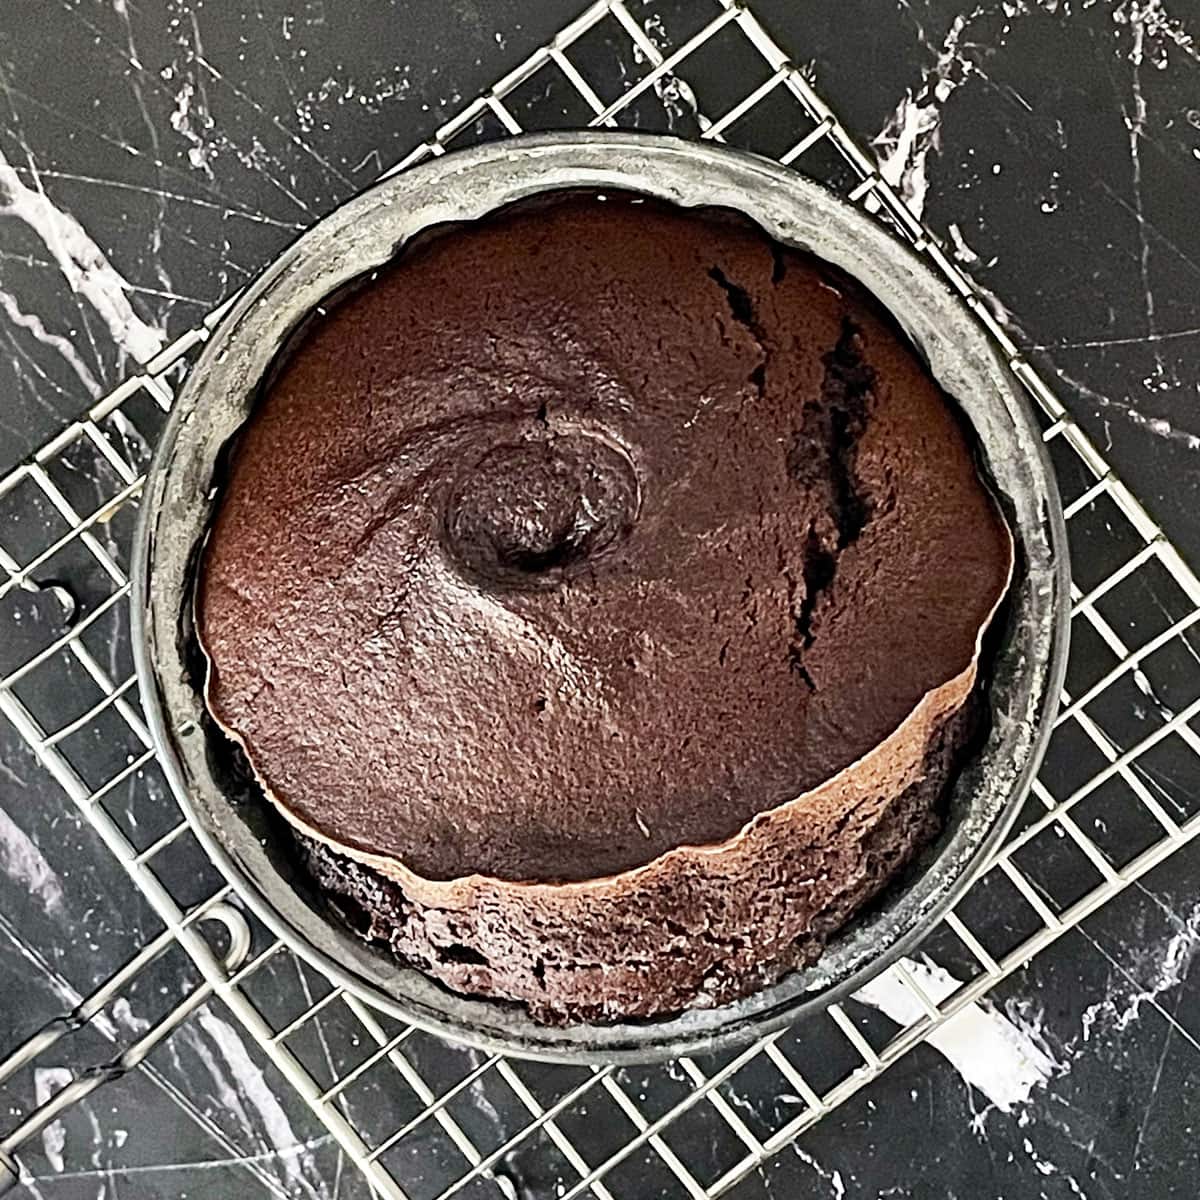 Chocolate cake baked in Air fryer on cooling rack.